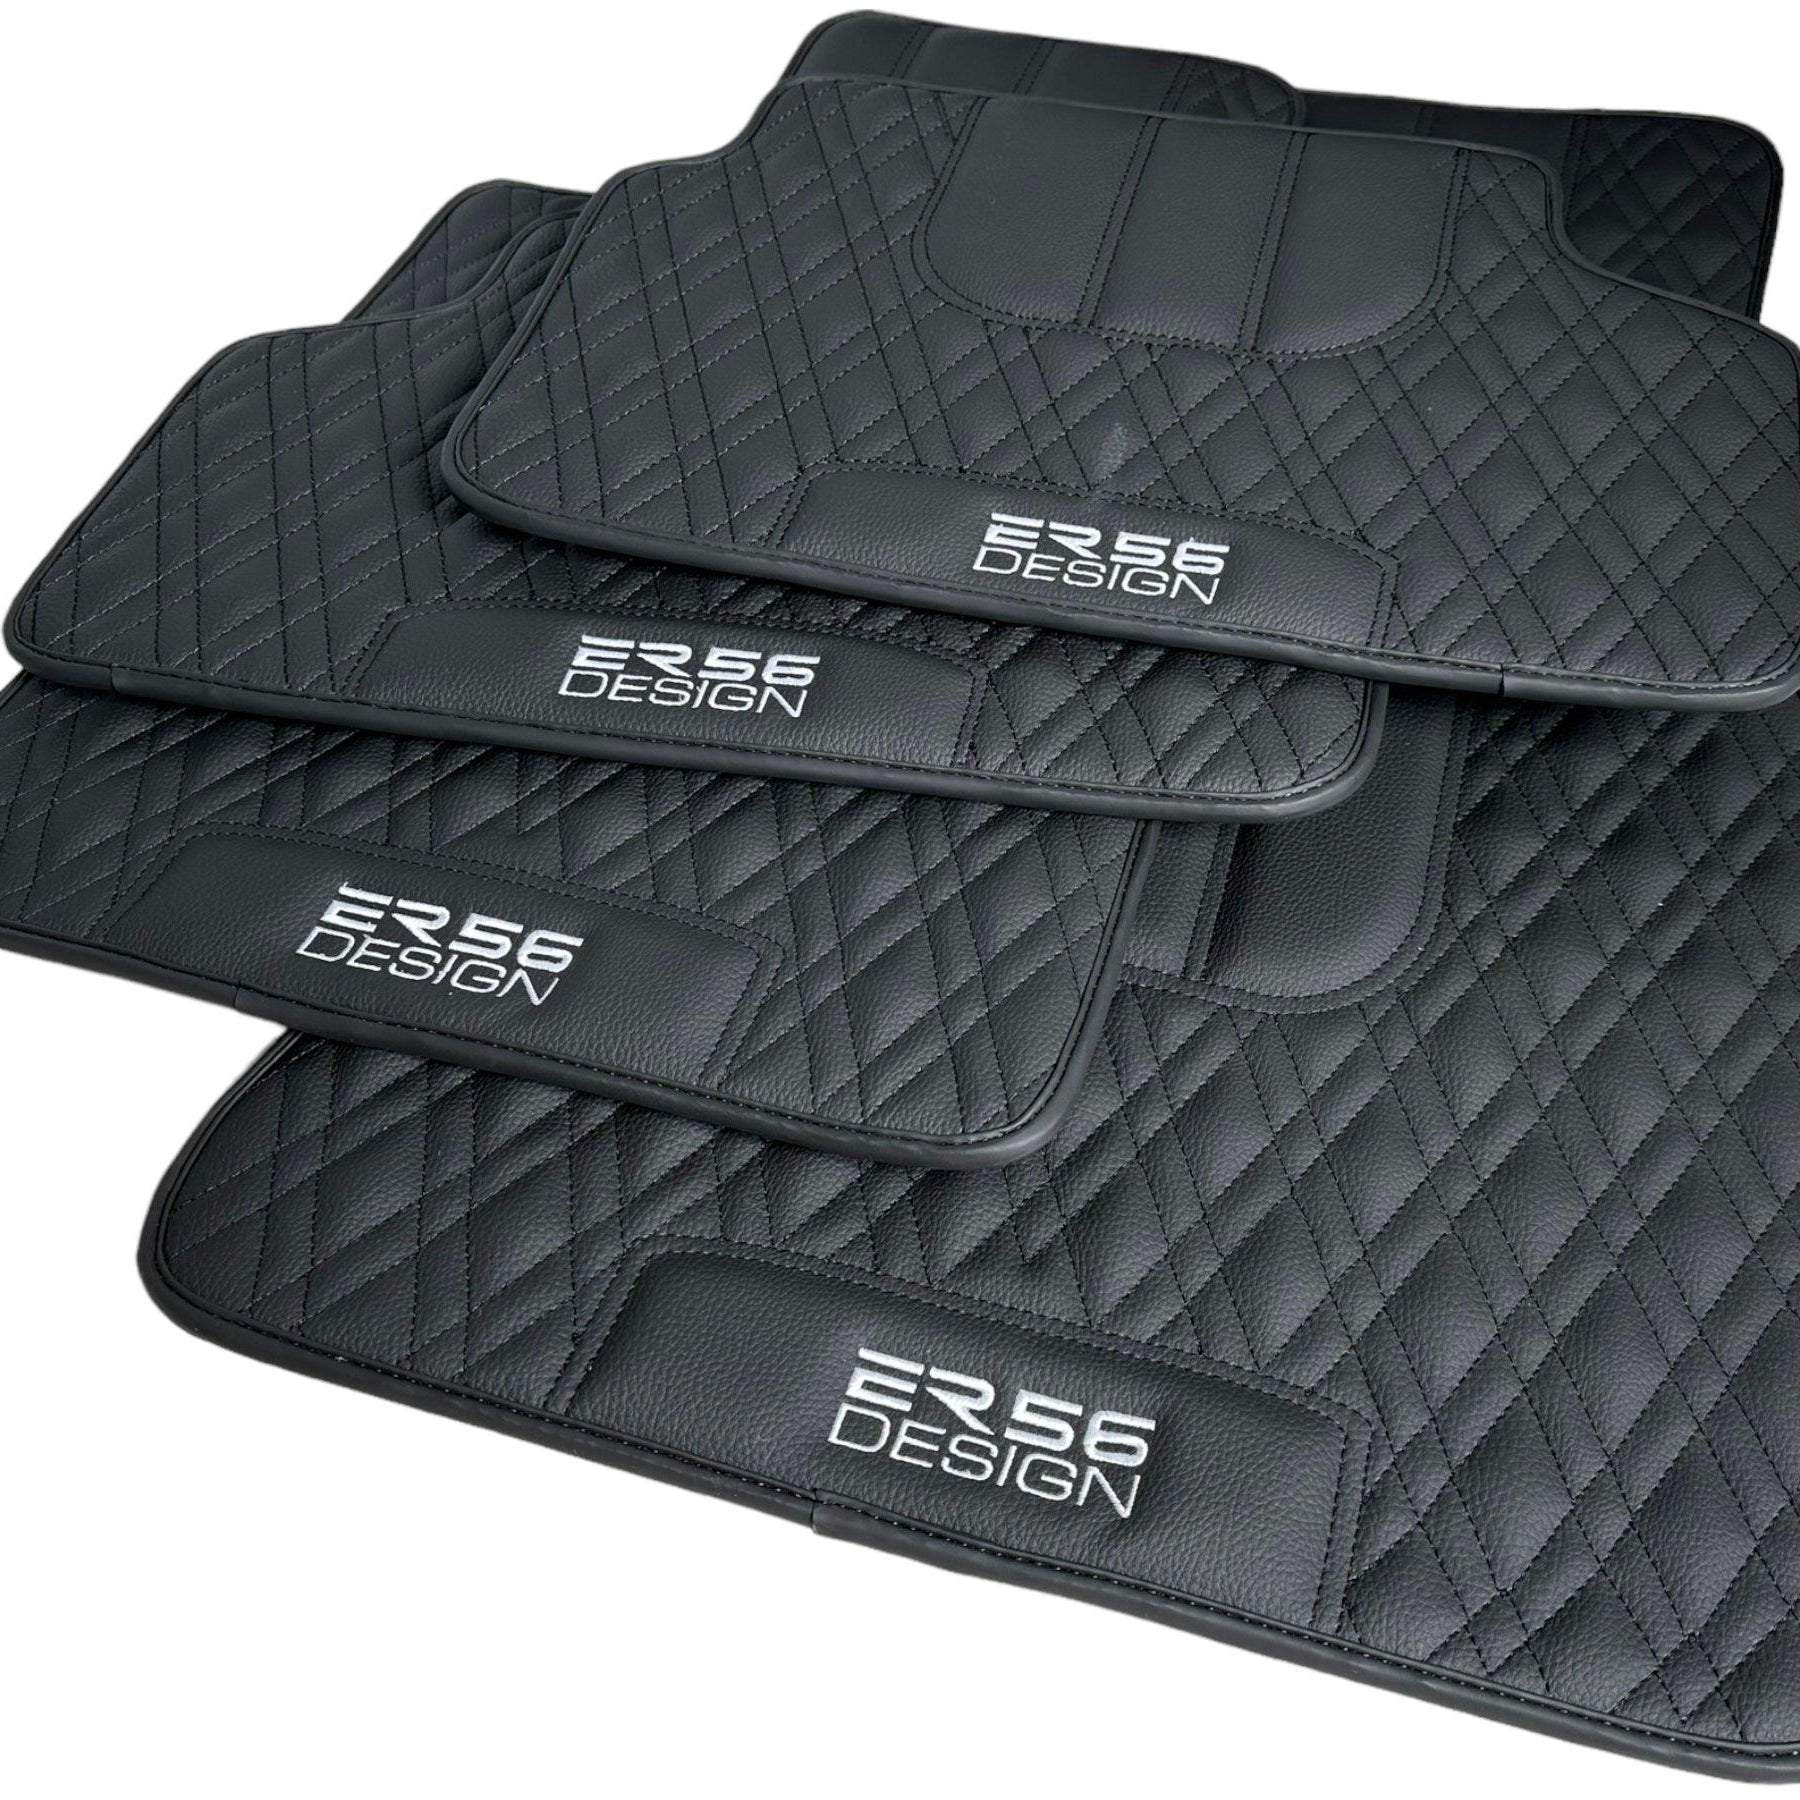 Floor Mats For BMW 6 Series E24 Coupe Black Leather Er56 Design - AutoWin